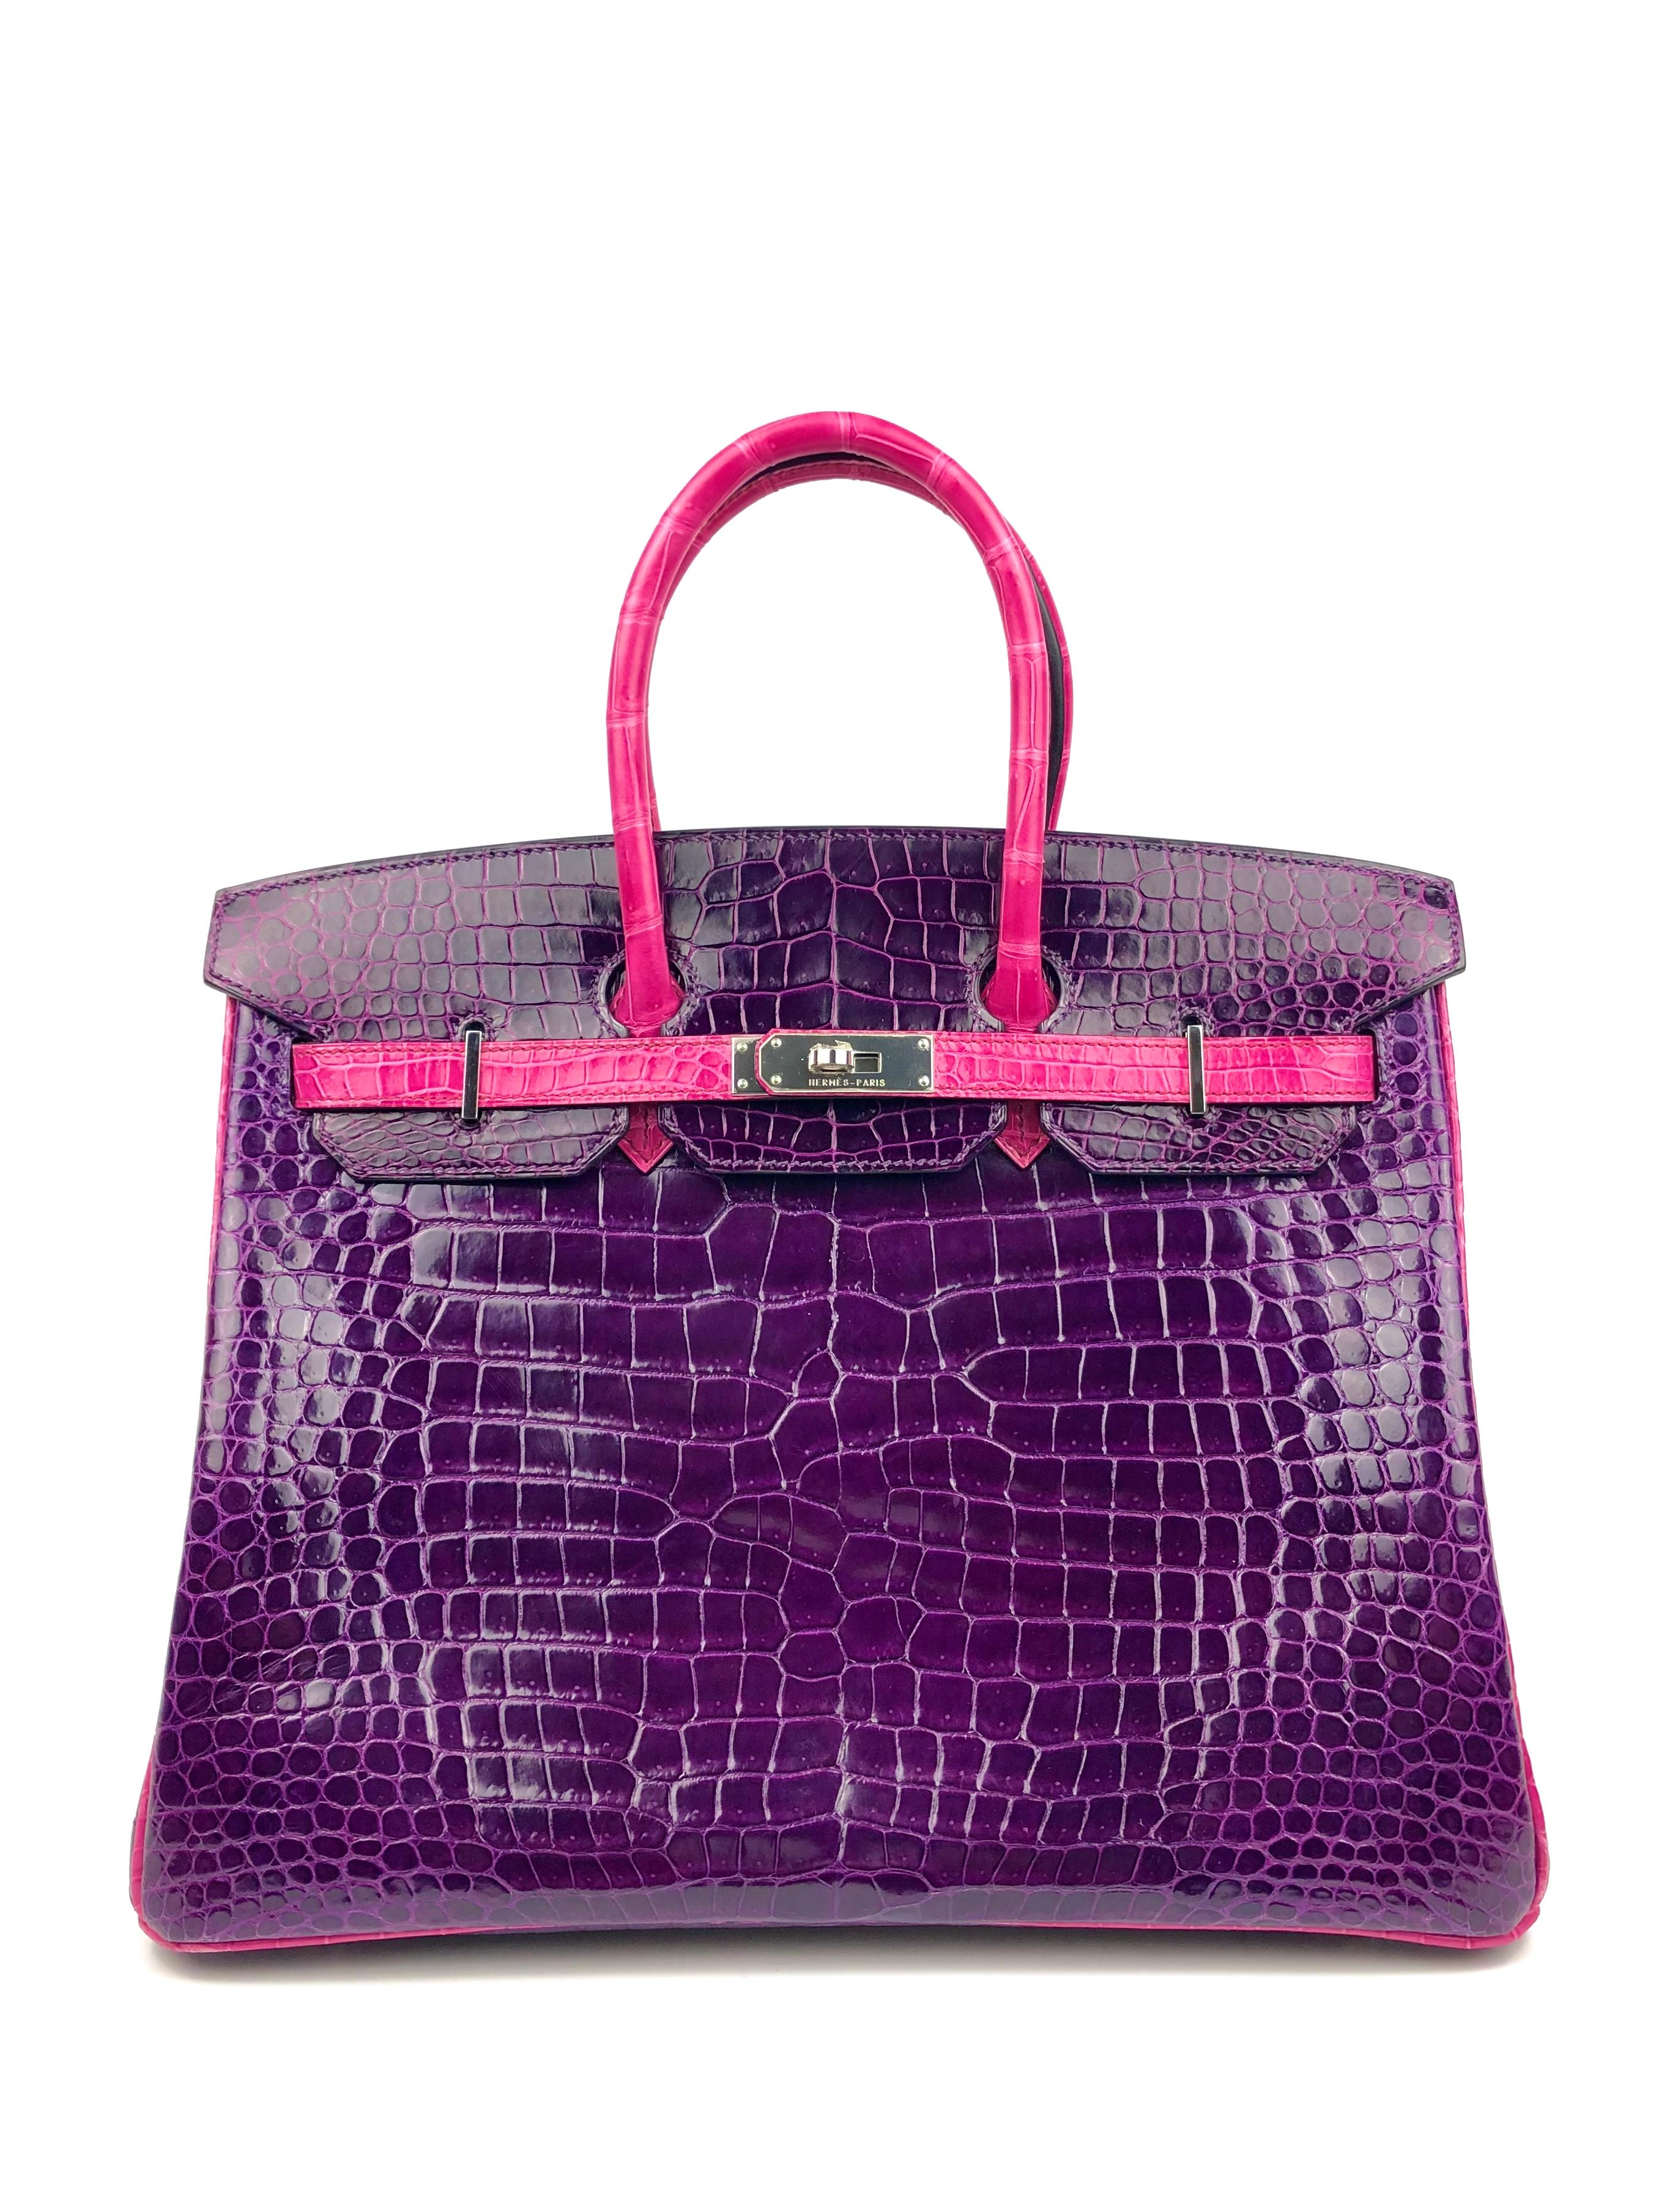 Like New Hermes Birkin 35 HSS Special Order Amethyst Purple Rose Tyrien Pink Crocodile. All Plastic Still attached. From Collectors Closet. Shop With Confidence From Lux Addicts. Authenticity Guaranteed! 